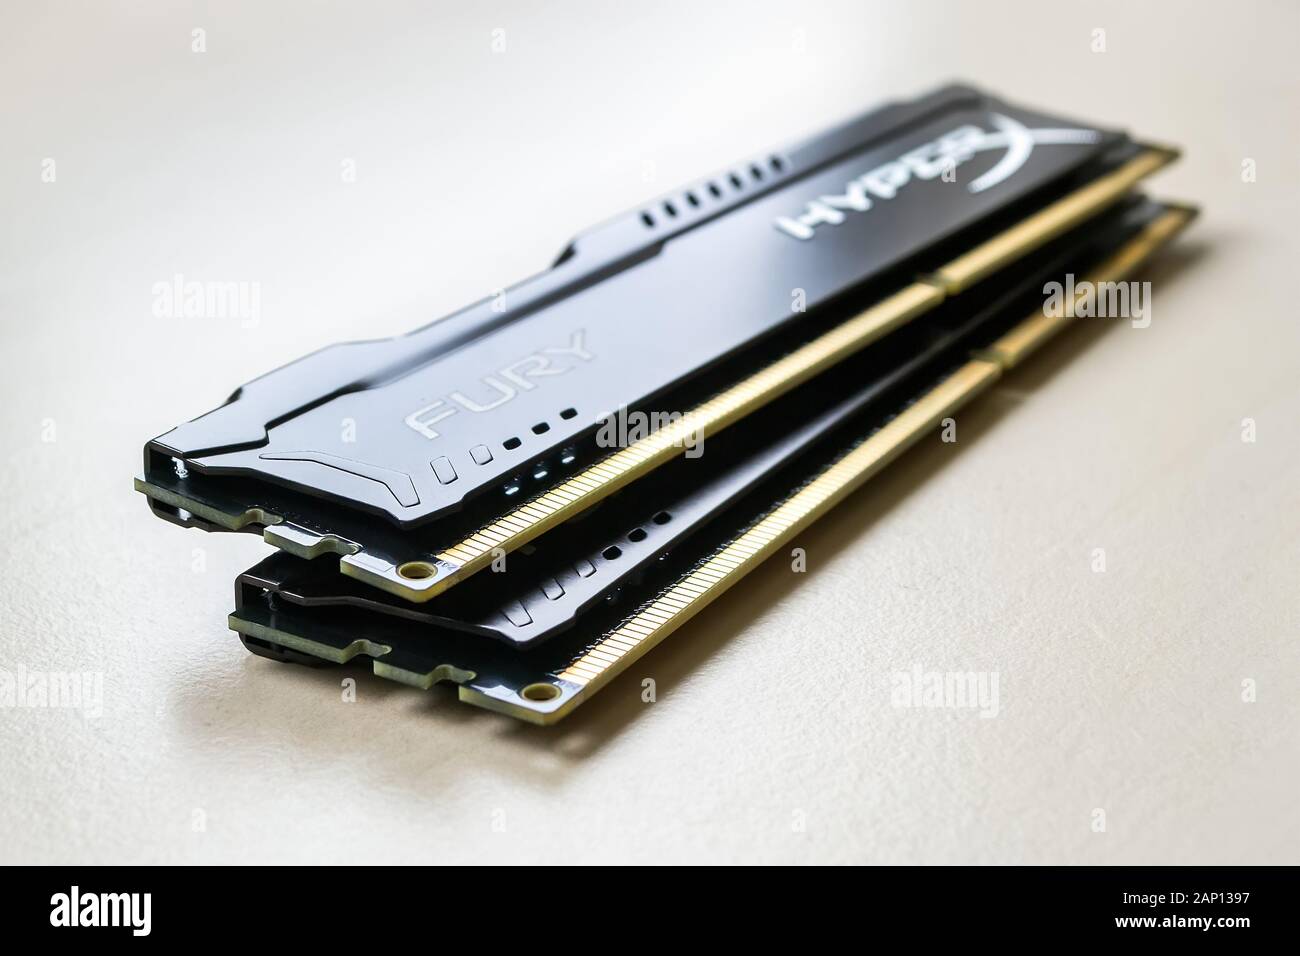 Varna, Bulgaria, January 19, 2020. RAM Kingston Fury on a table. Two DIMM DDR 4 Kingston HyperX Fury memory modules on a gray surface. Front view. Stock Photo